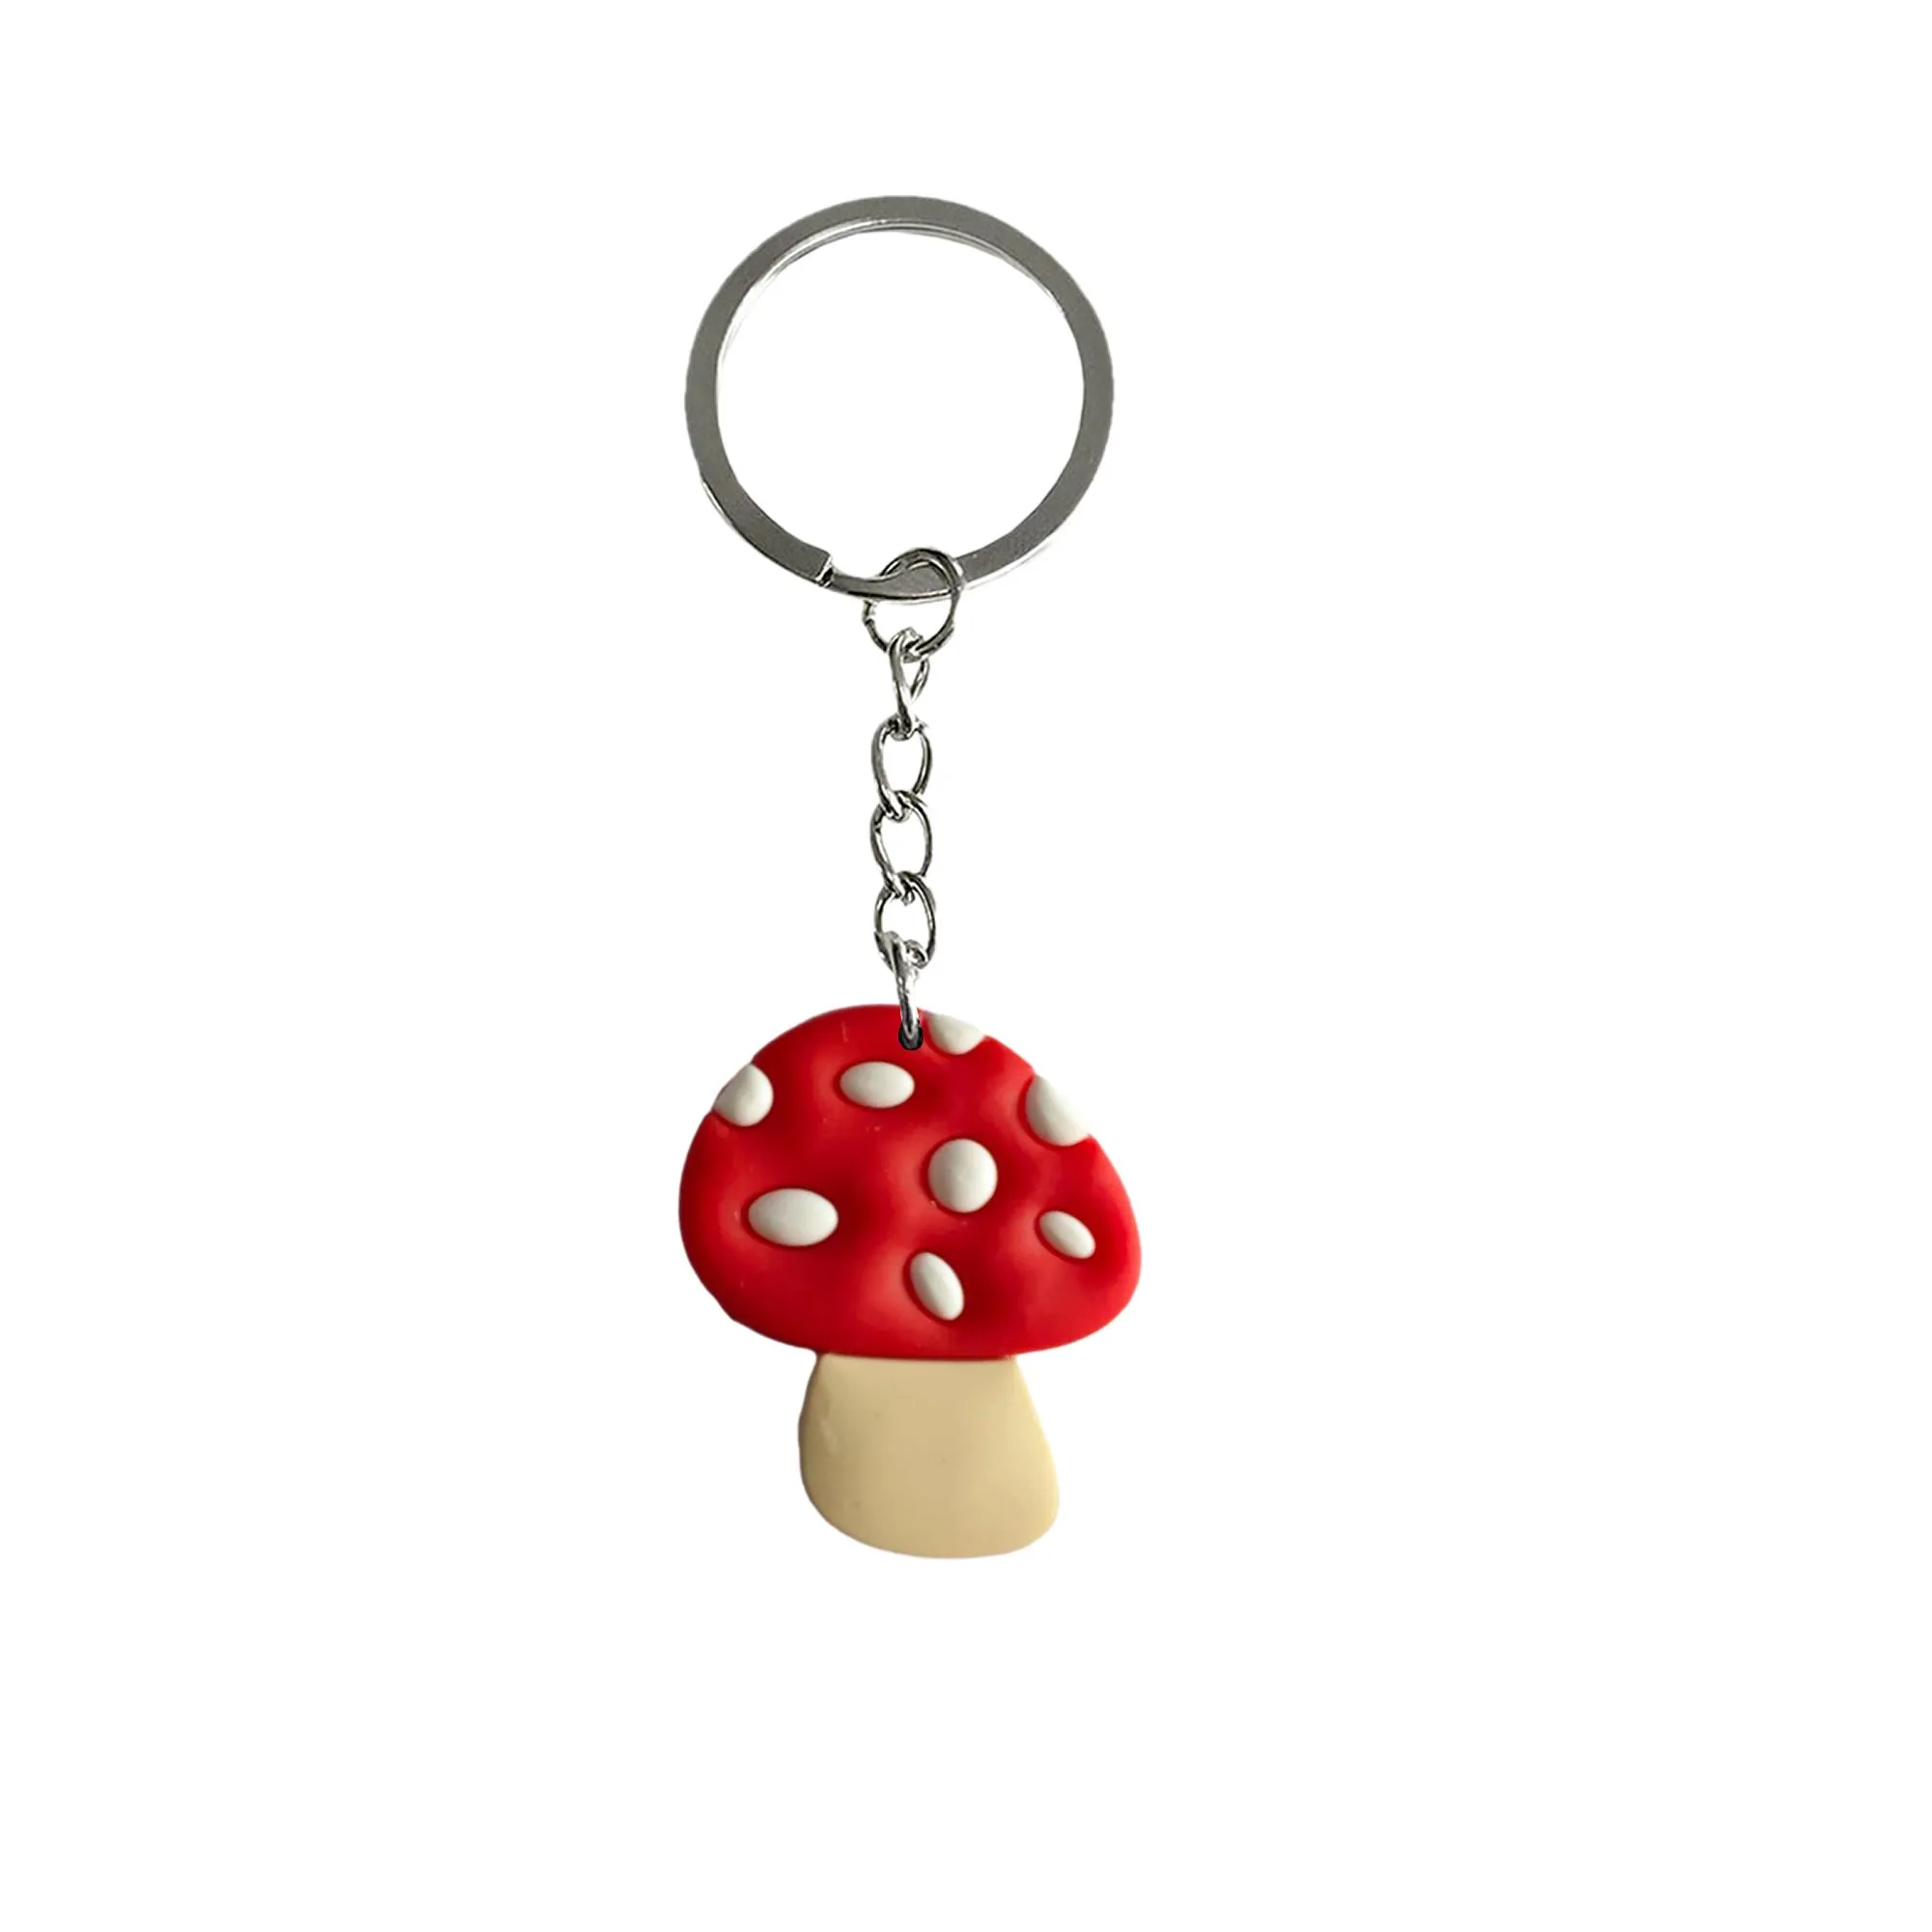 mushroom keychain for birthday christmas party favors gift tags goodie bag stuffer gifts key purse handbag charms women keyring suitable schoolbag backpack car chain kid boy girl ring fans